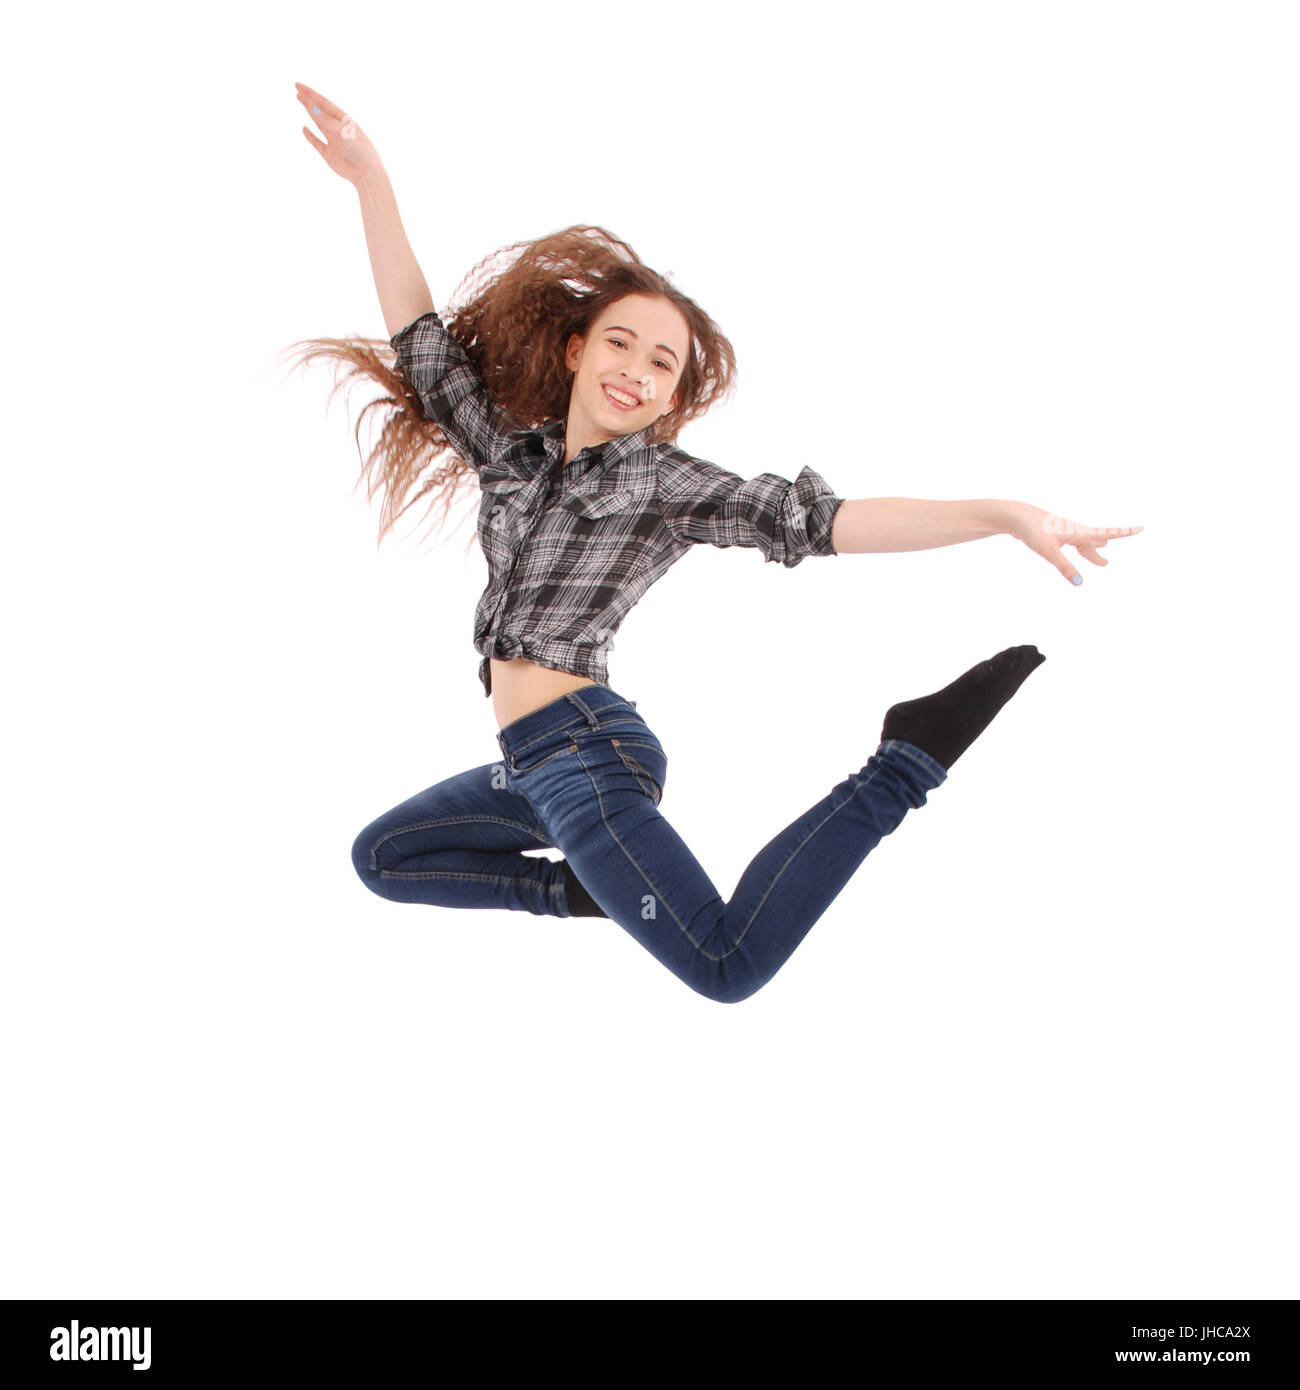 Pretty cute caucasian girl wearing a checkered shirt and blue jeans. The girl is jumping and smiling. Stock Photo